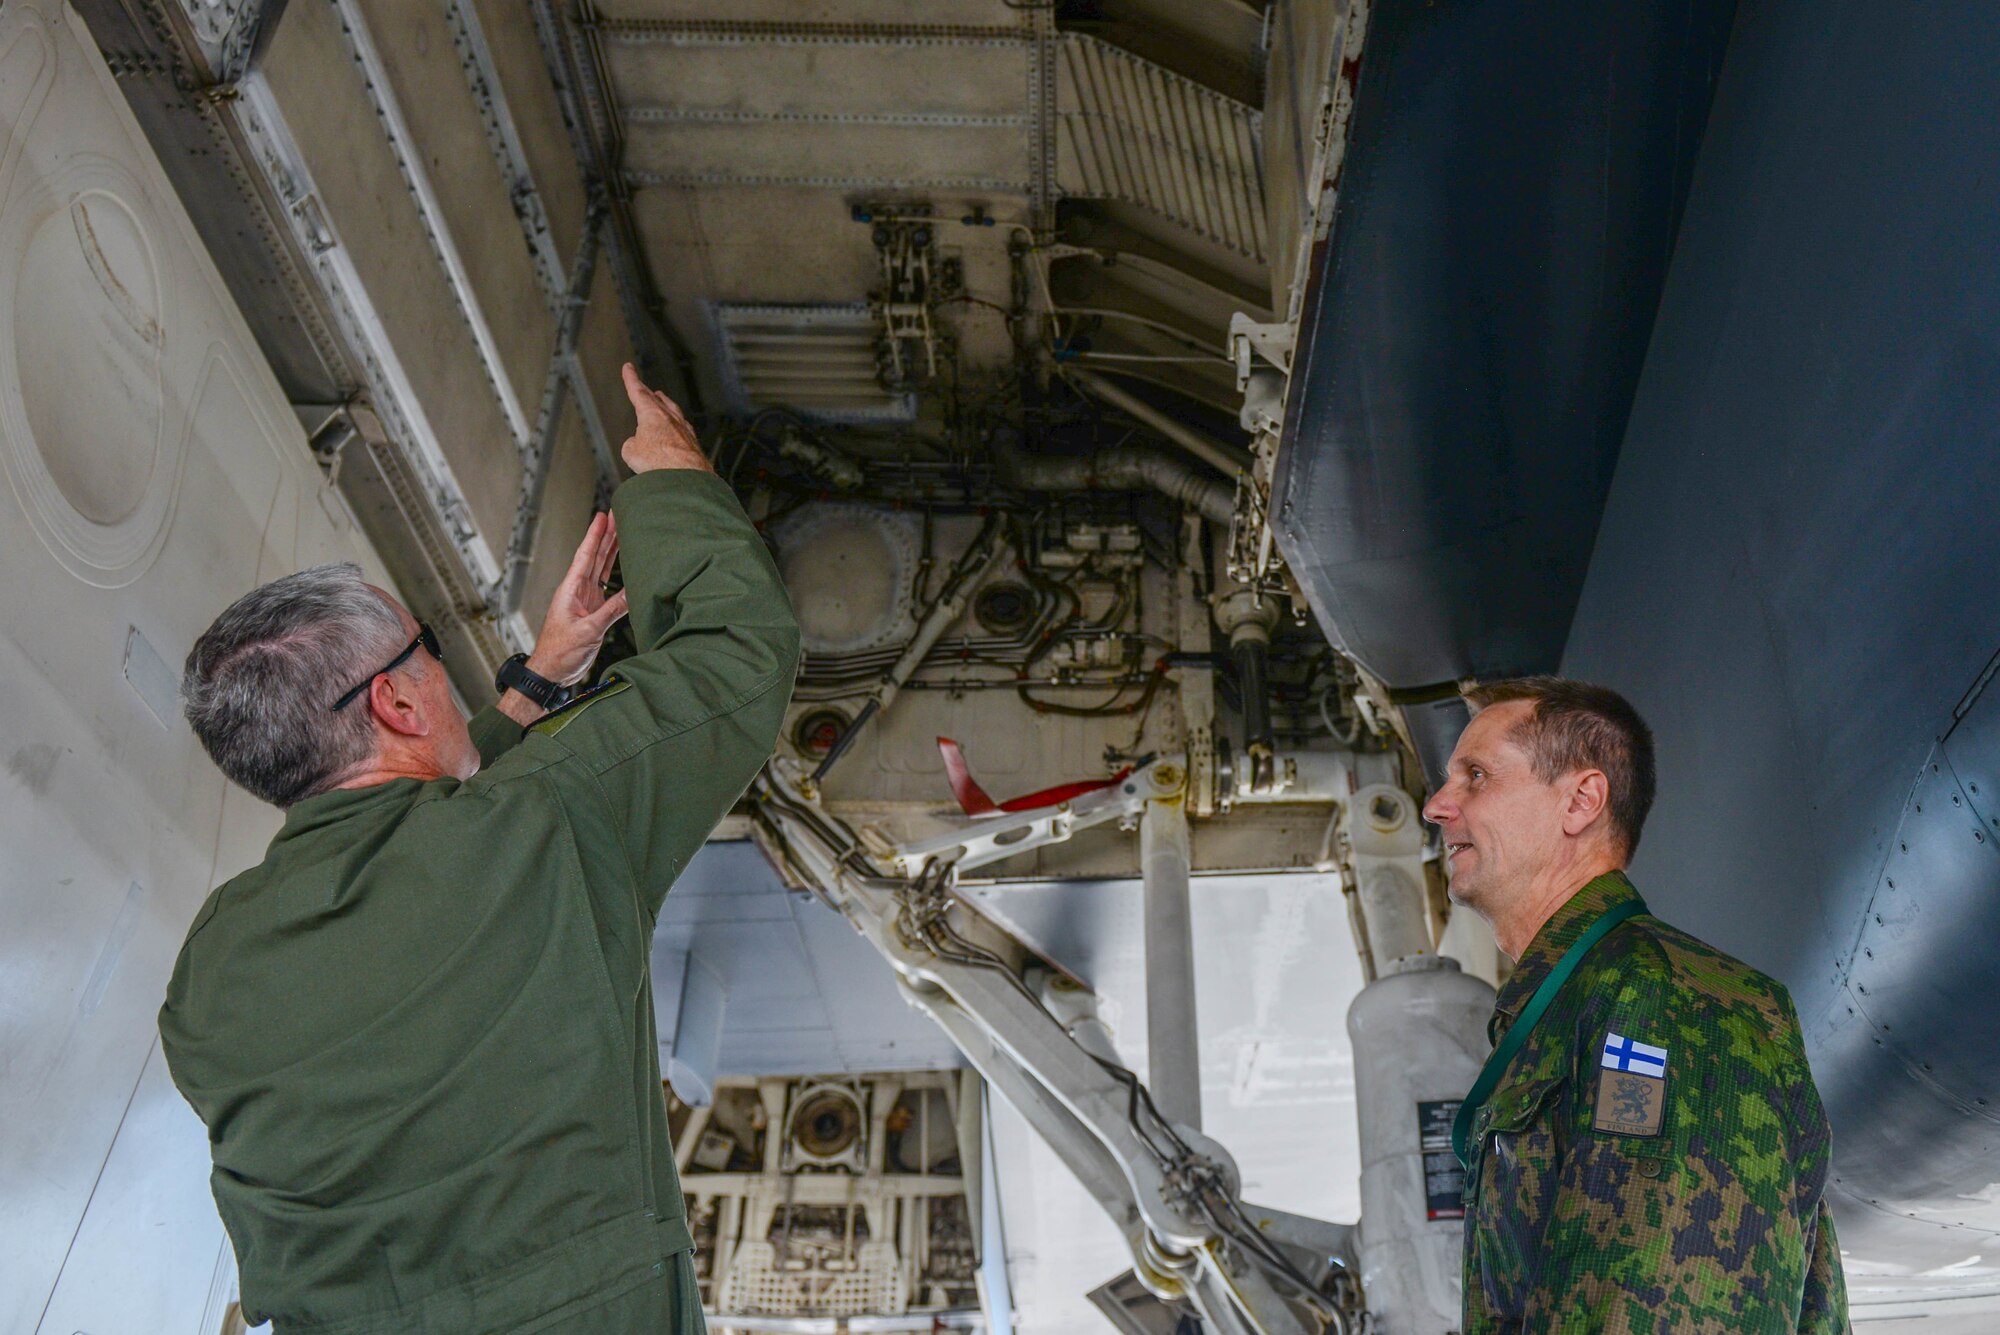 Col. R. Allen Barksdale, the 28th Operations Group commander, points out aspects of the B-1B Lancer to a visiting foreign defense attaché at Ellsworth Air Force Base, S.D., Sept. 4, 2019. Approximately 45 defense attachés from several different countries visited the base to learn more about the mission of the 28th Bomb Wing and the 89th Attack Squadron.  They toured statics of munitions; a B-1, assigned to the 37th Bomb Squadron; and a UH-72 Lakota, which was provided by the South Dakota National Guard. (U.S. Air Force photo by Tech. Sgt. Jette Carr)